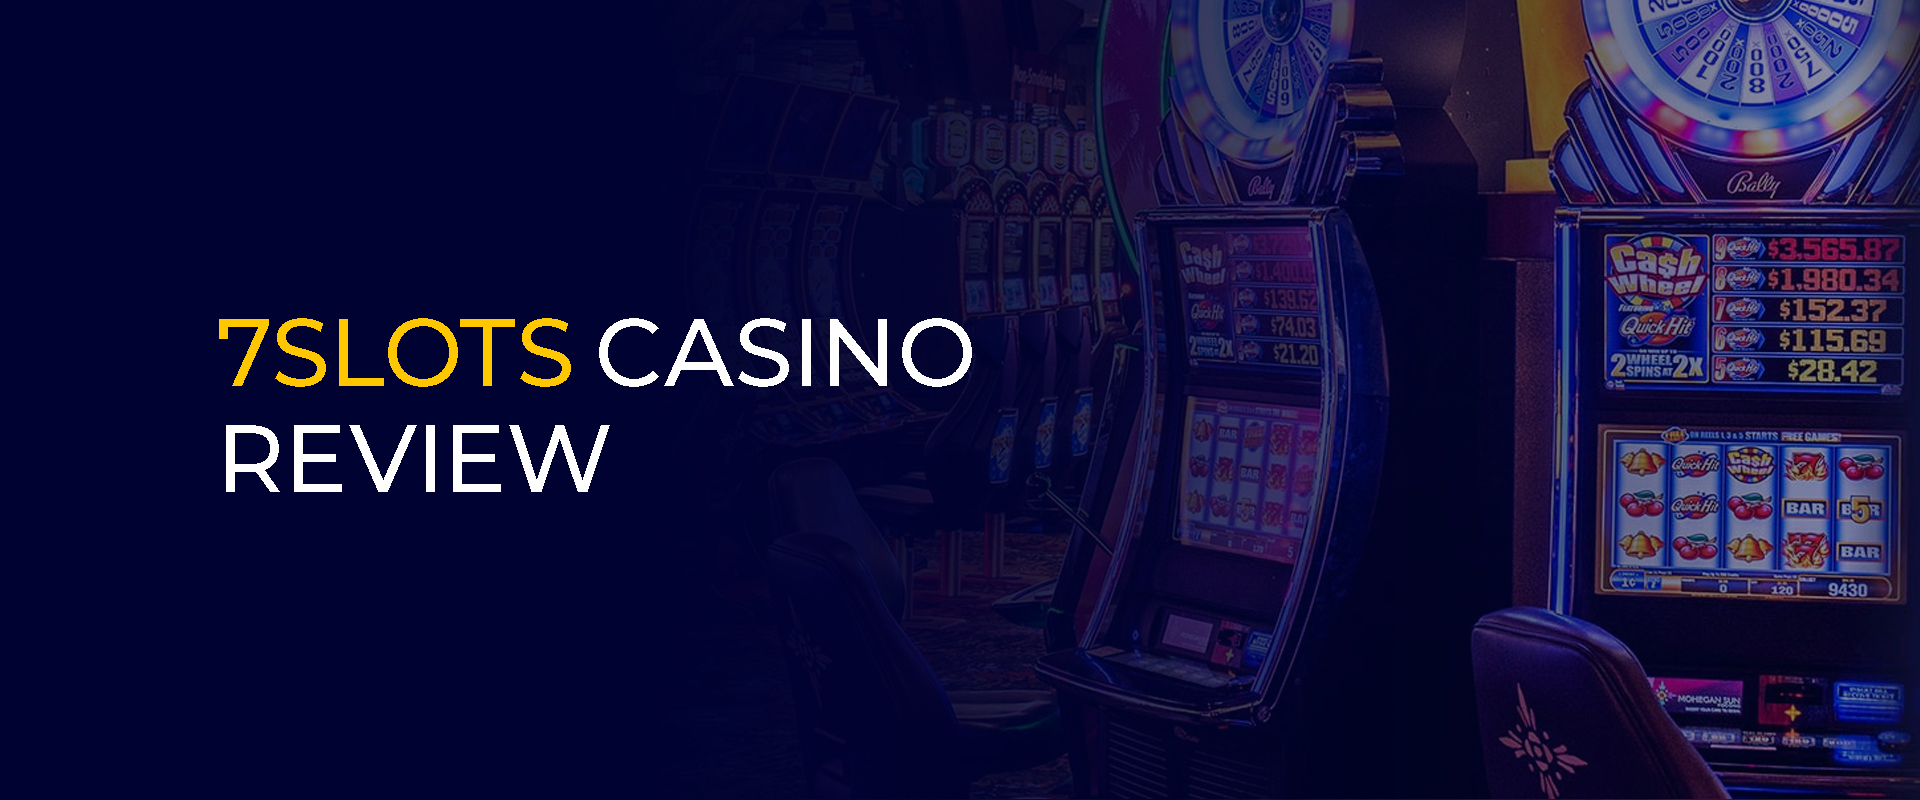 7Slots Casino Review